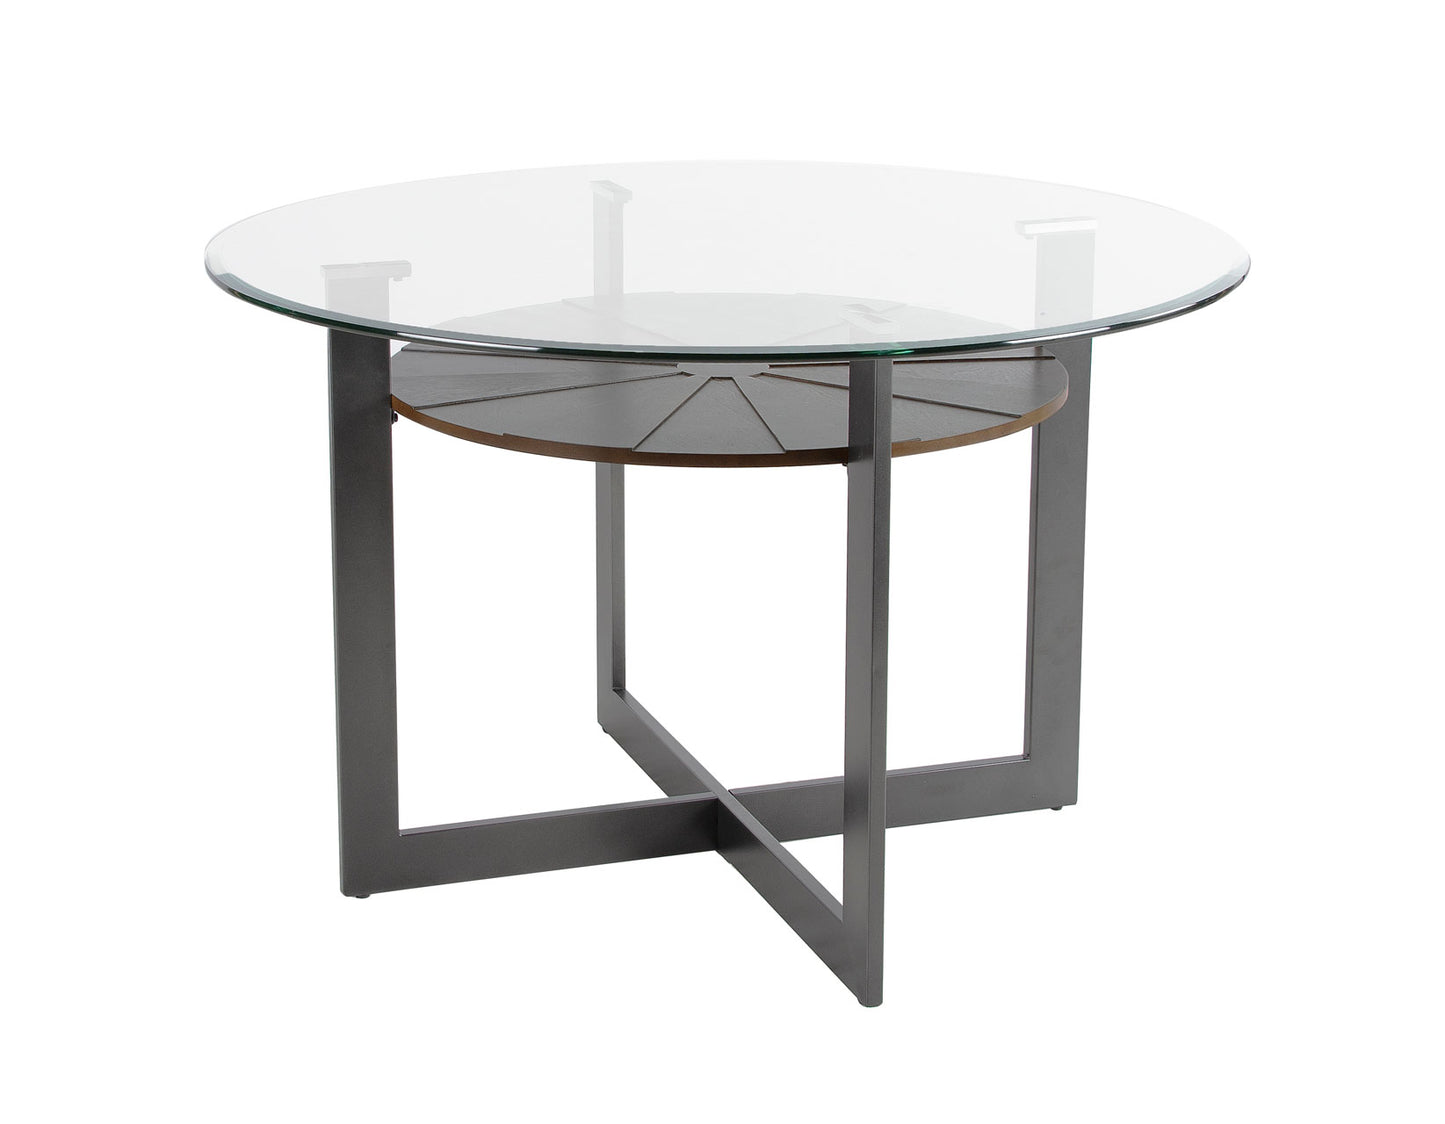 Olsen 5pc Glass Top Table & Upholstered Chairs